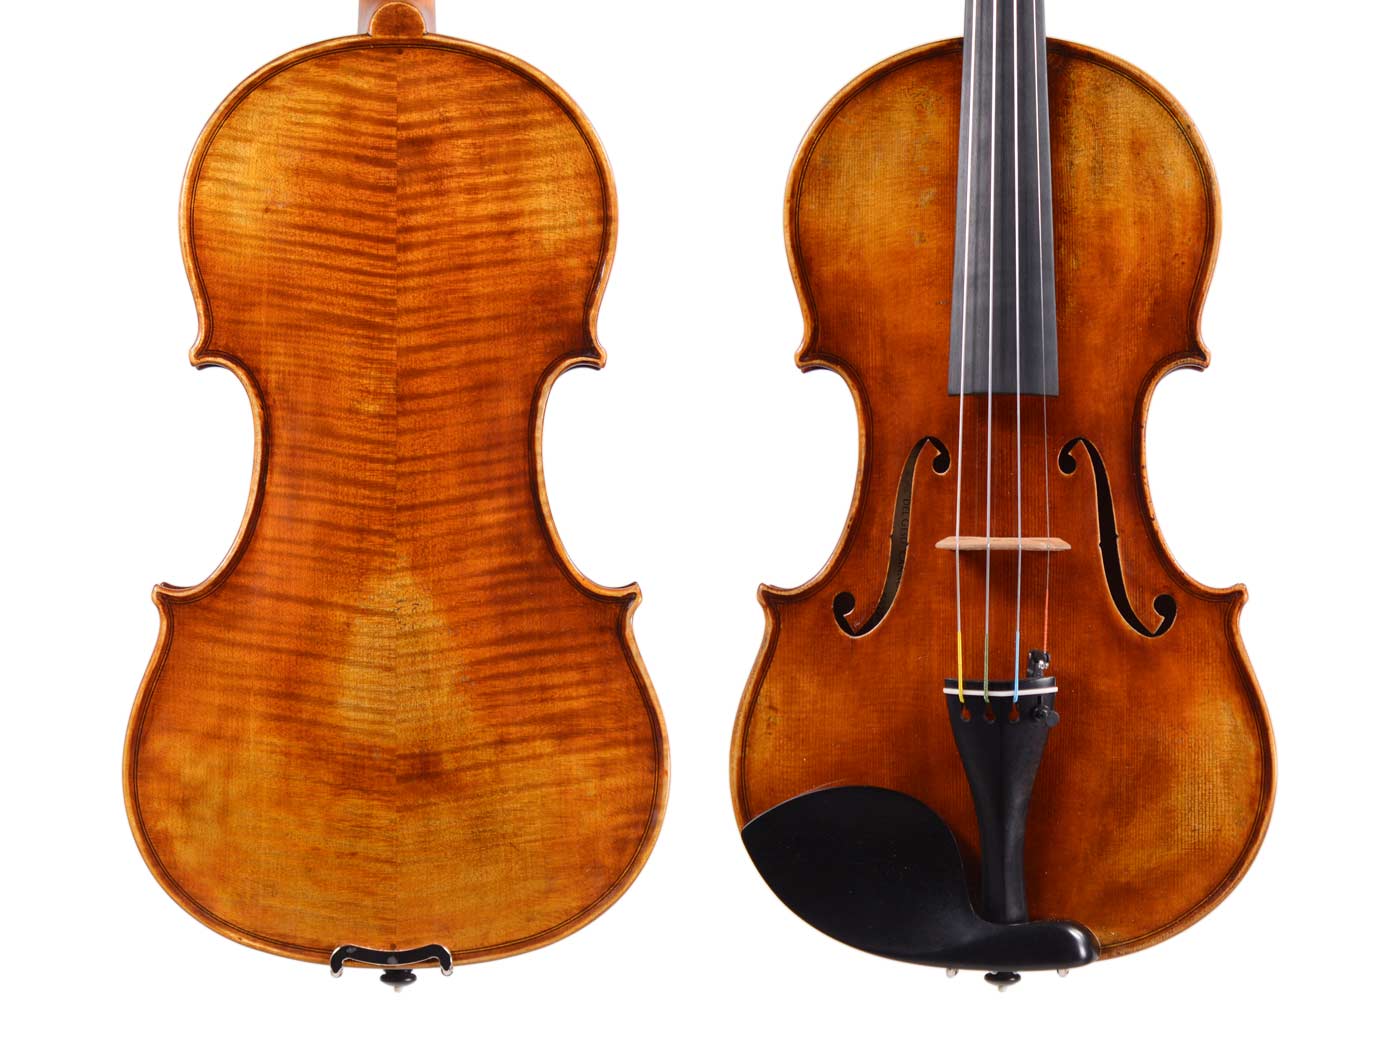 Like A Good Old Leather Couch: Behind The Craft of Antiquing Violins